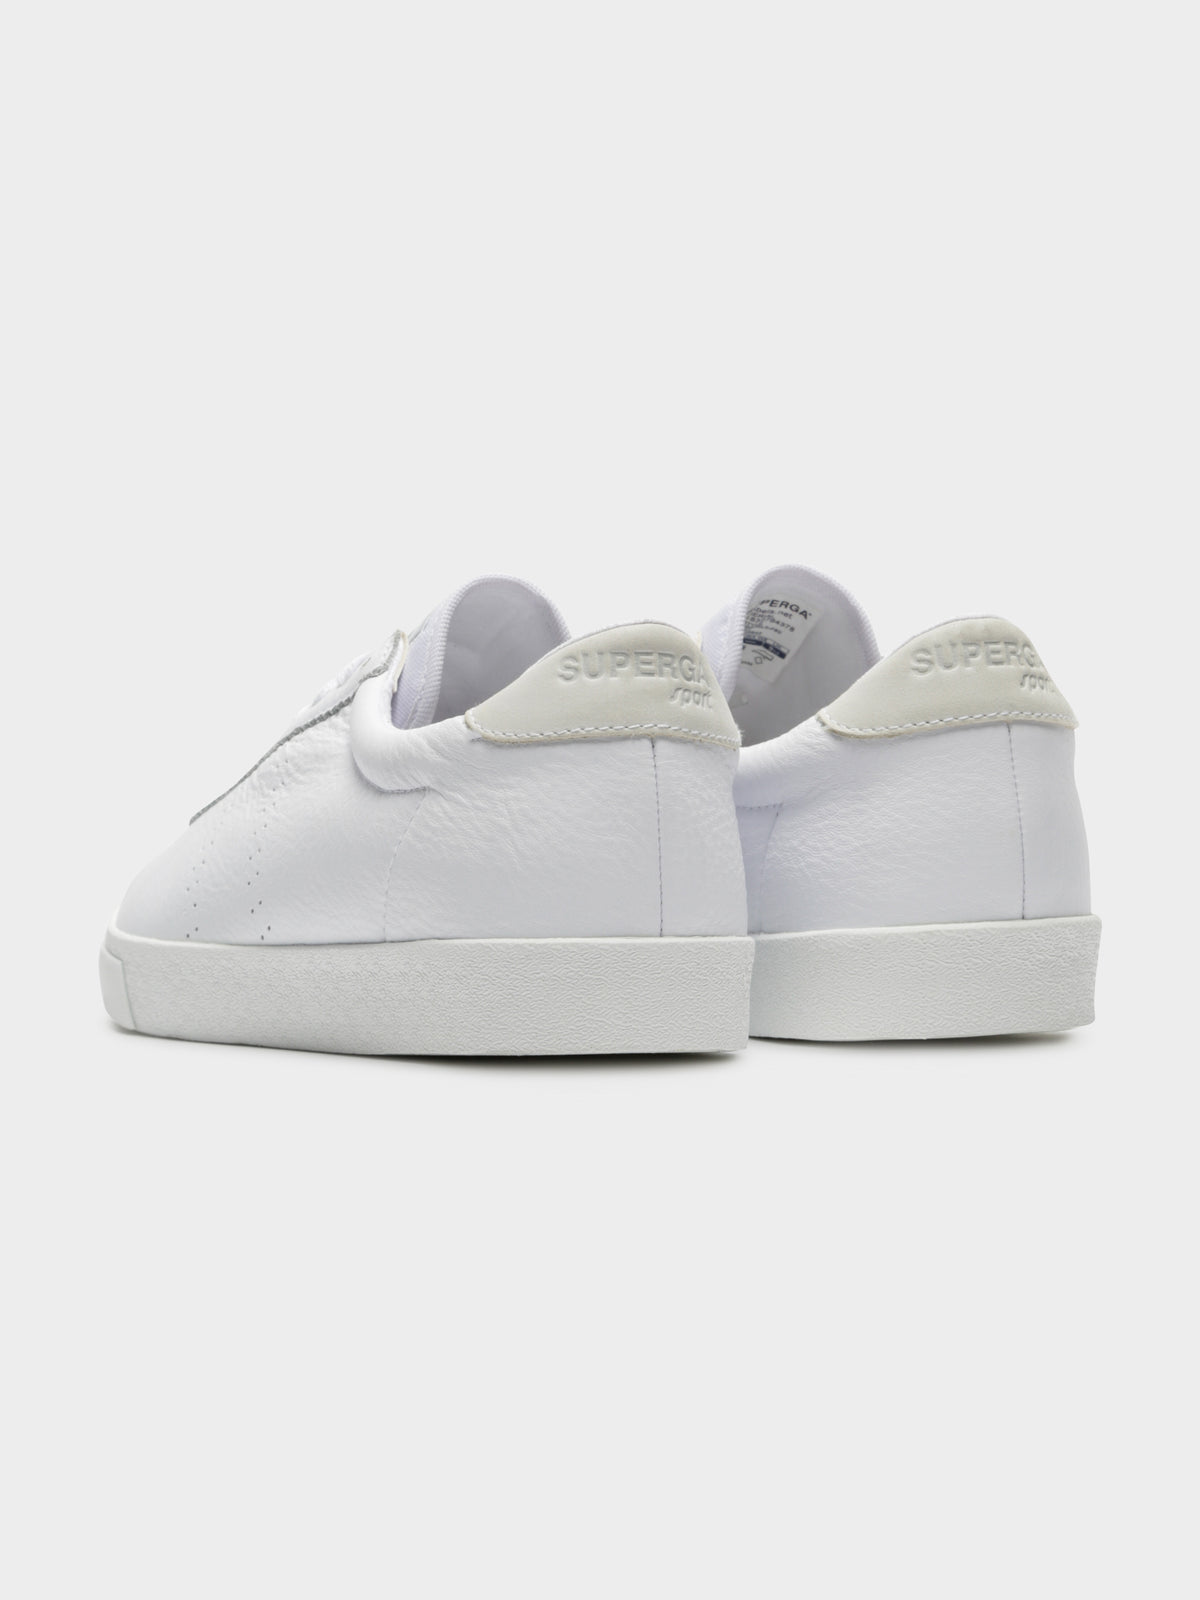 Mens 2843 Clubs Comfleau Sneakers in White